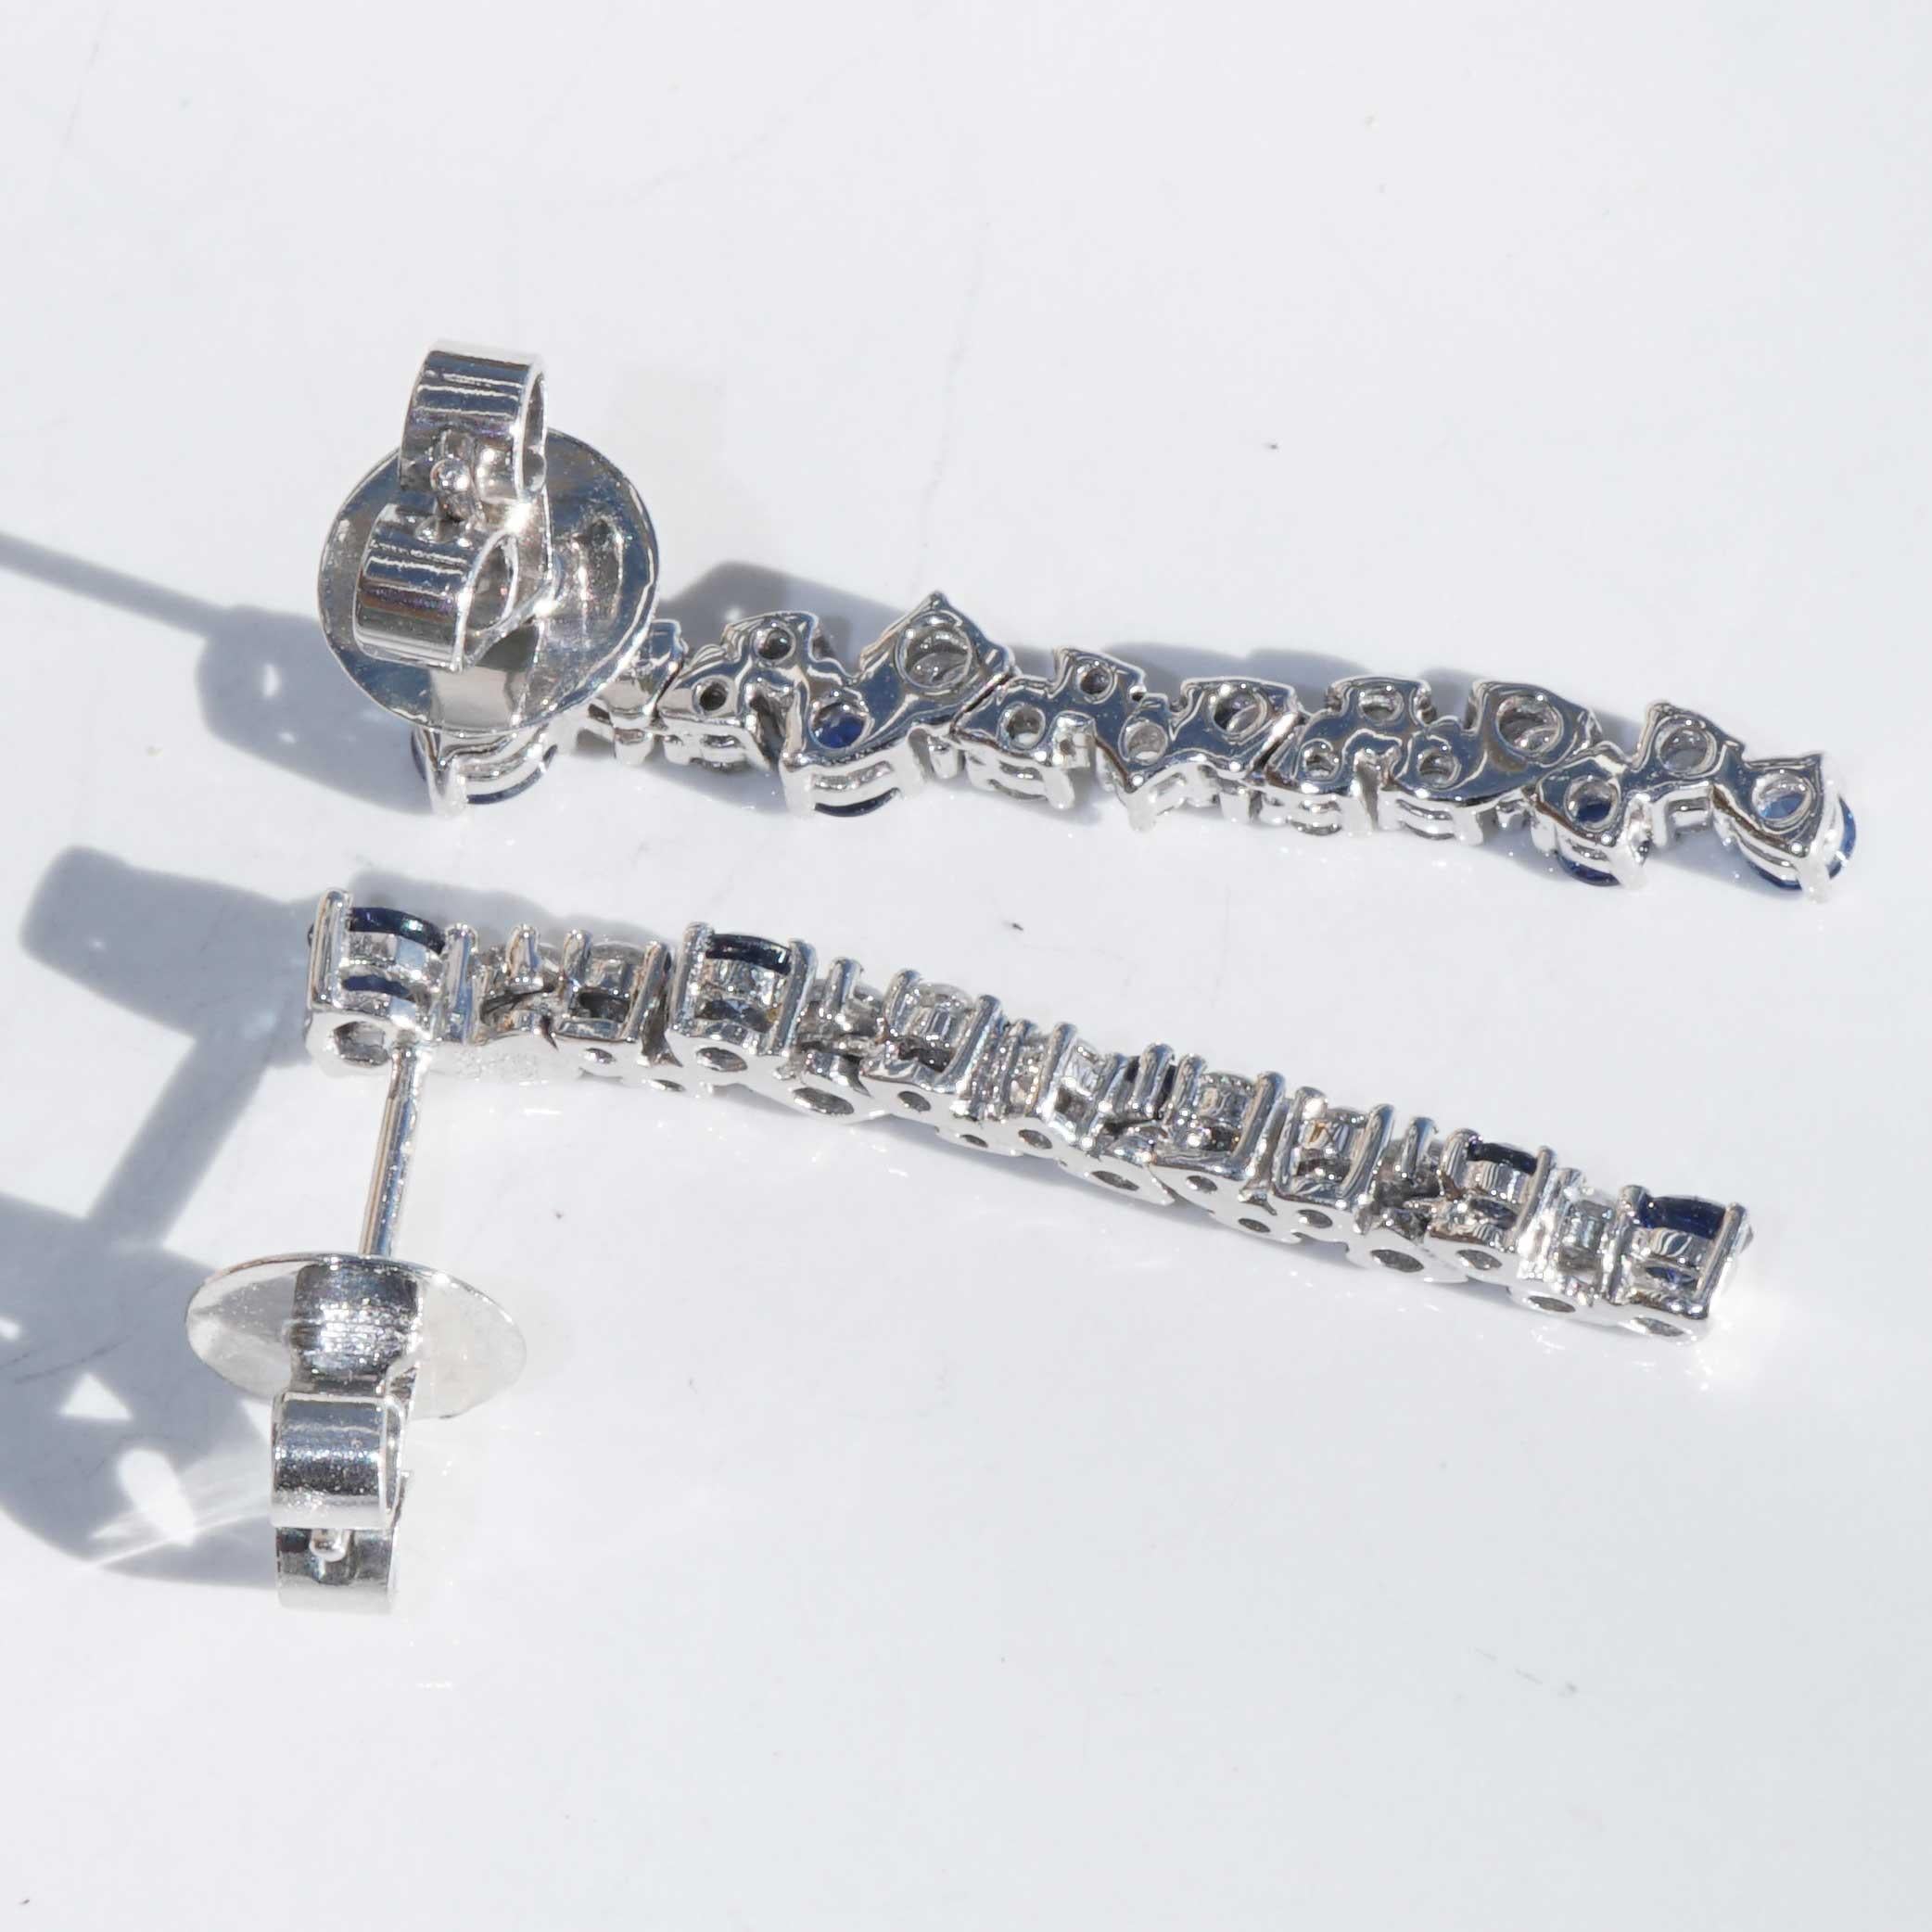 Brilliant Cut Saphire Brilliant Earrings for a glorious Appearance 0.50 ct 0.56 ct 27 x 4 mm